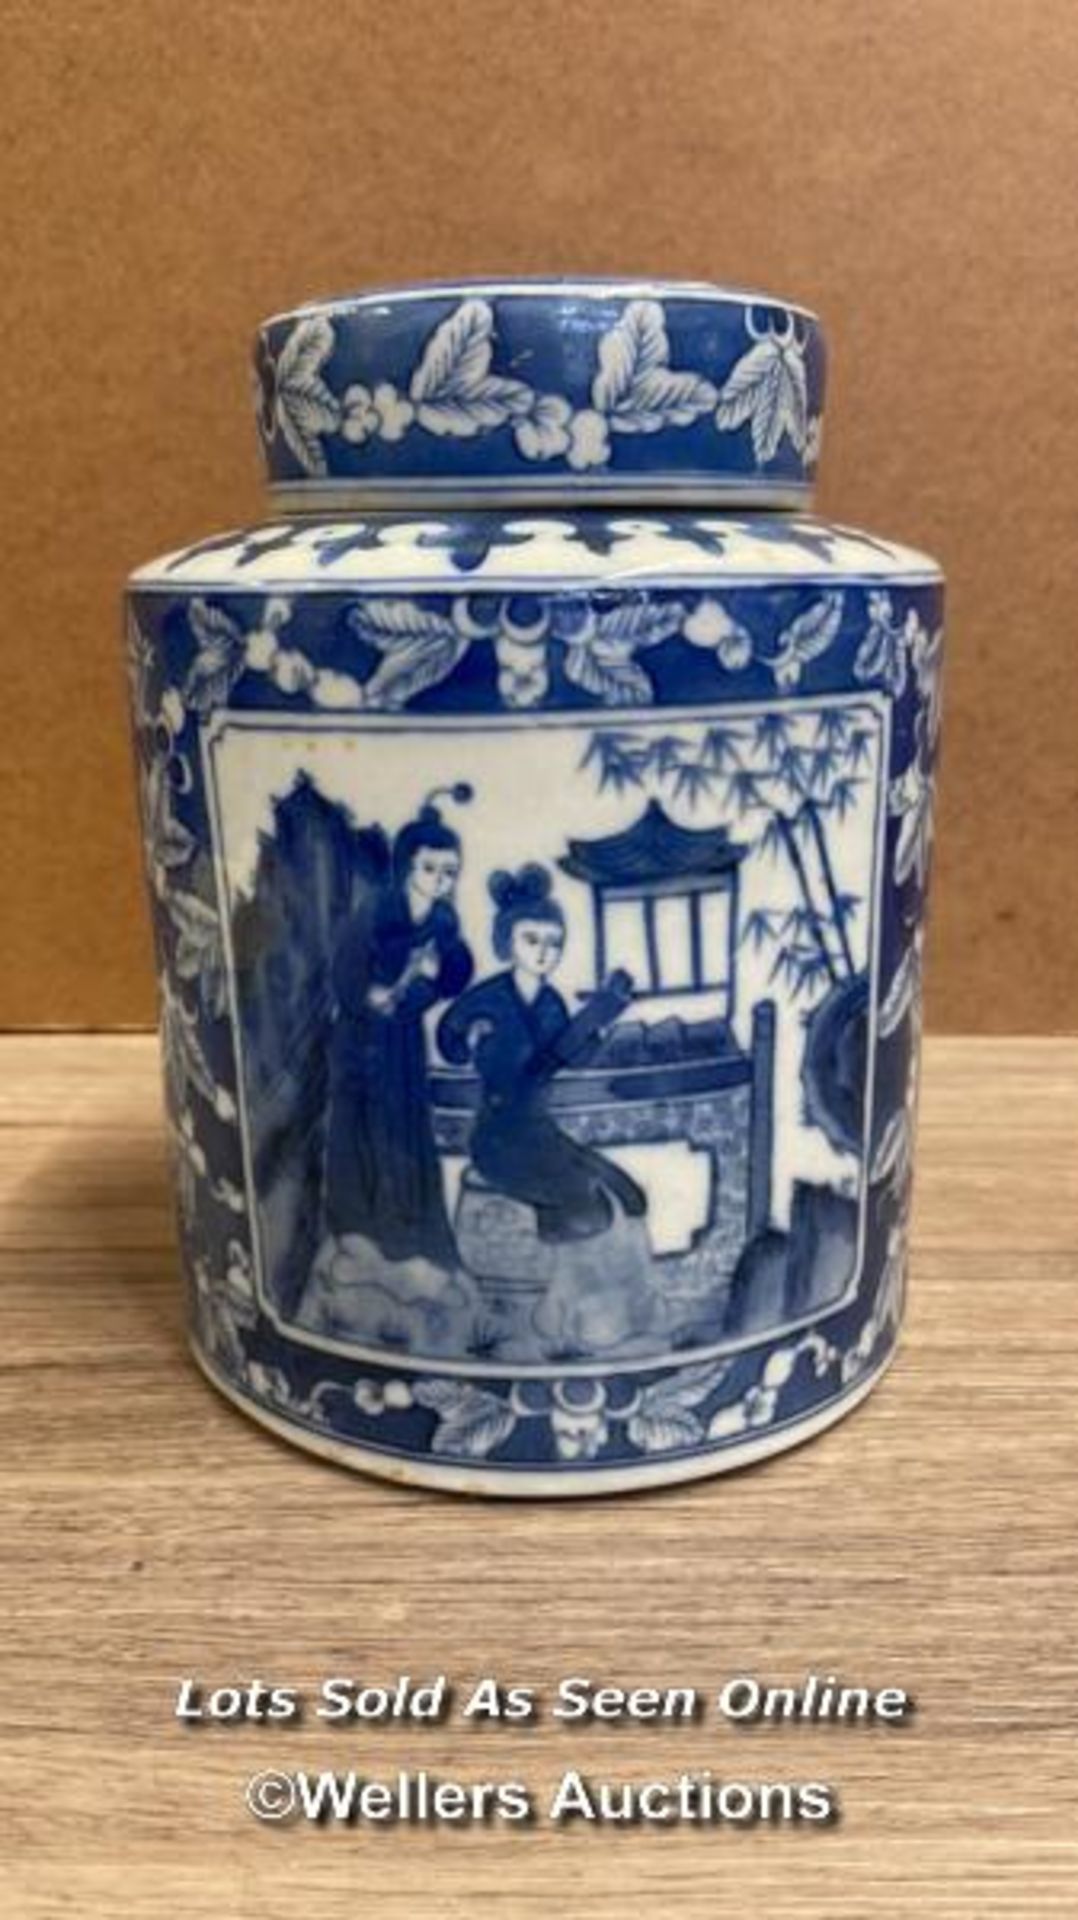 A CHINESE BLUE & WHITE JAR WITH LID, MAKERS STAMP AT THE BASE, VERY GOOD CONDITION. 21CM HIGH